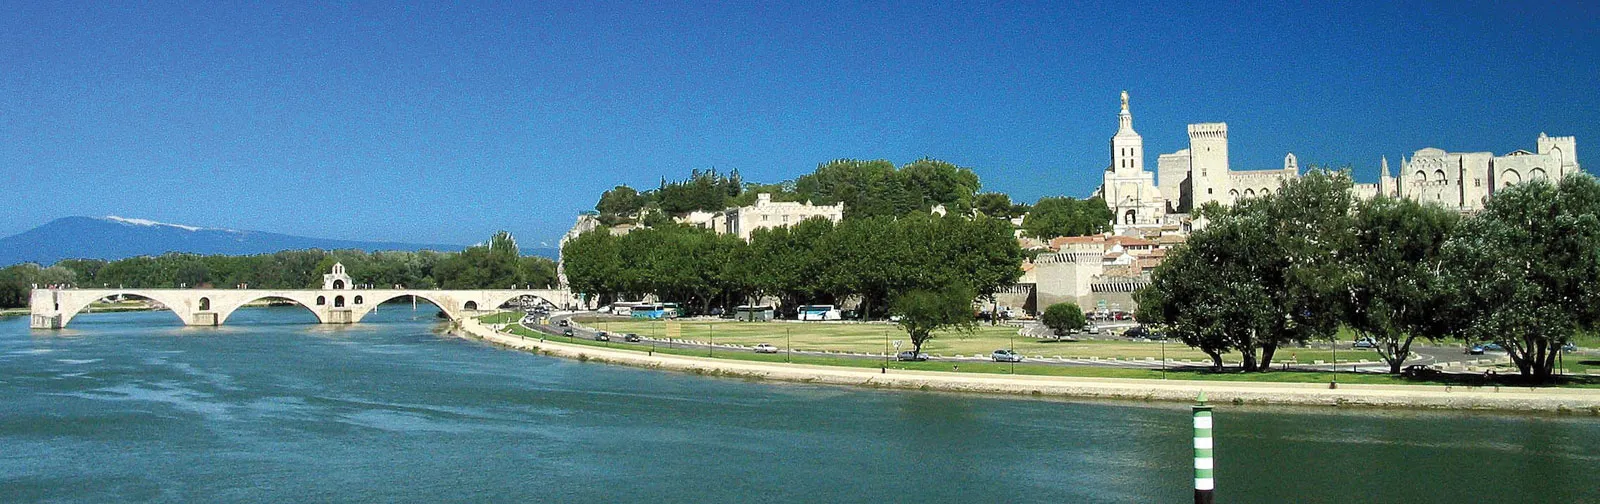 19-surprising-facts-about-rhone-river